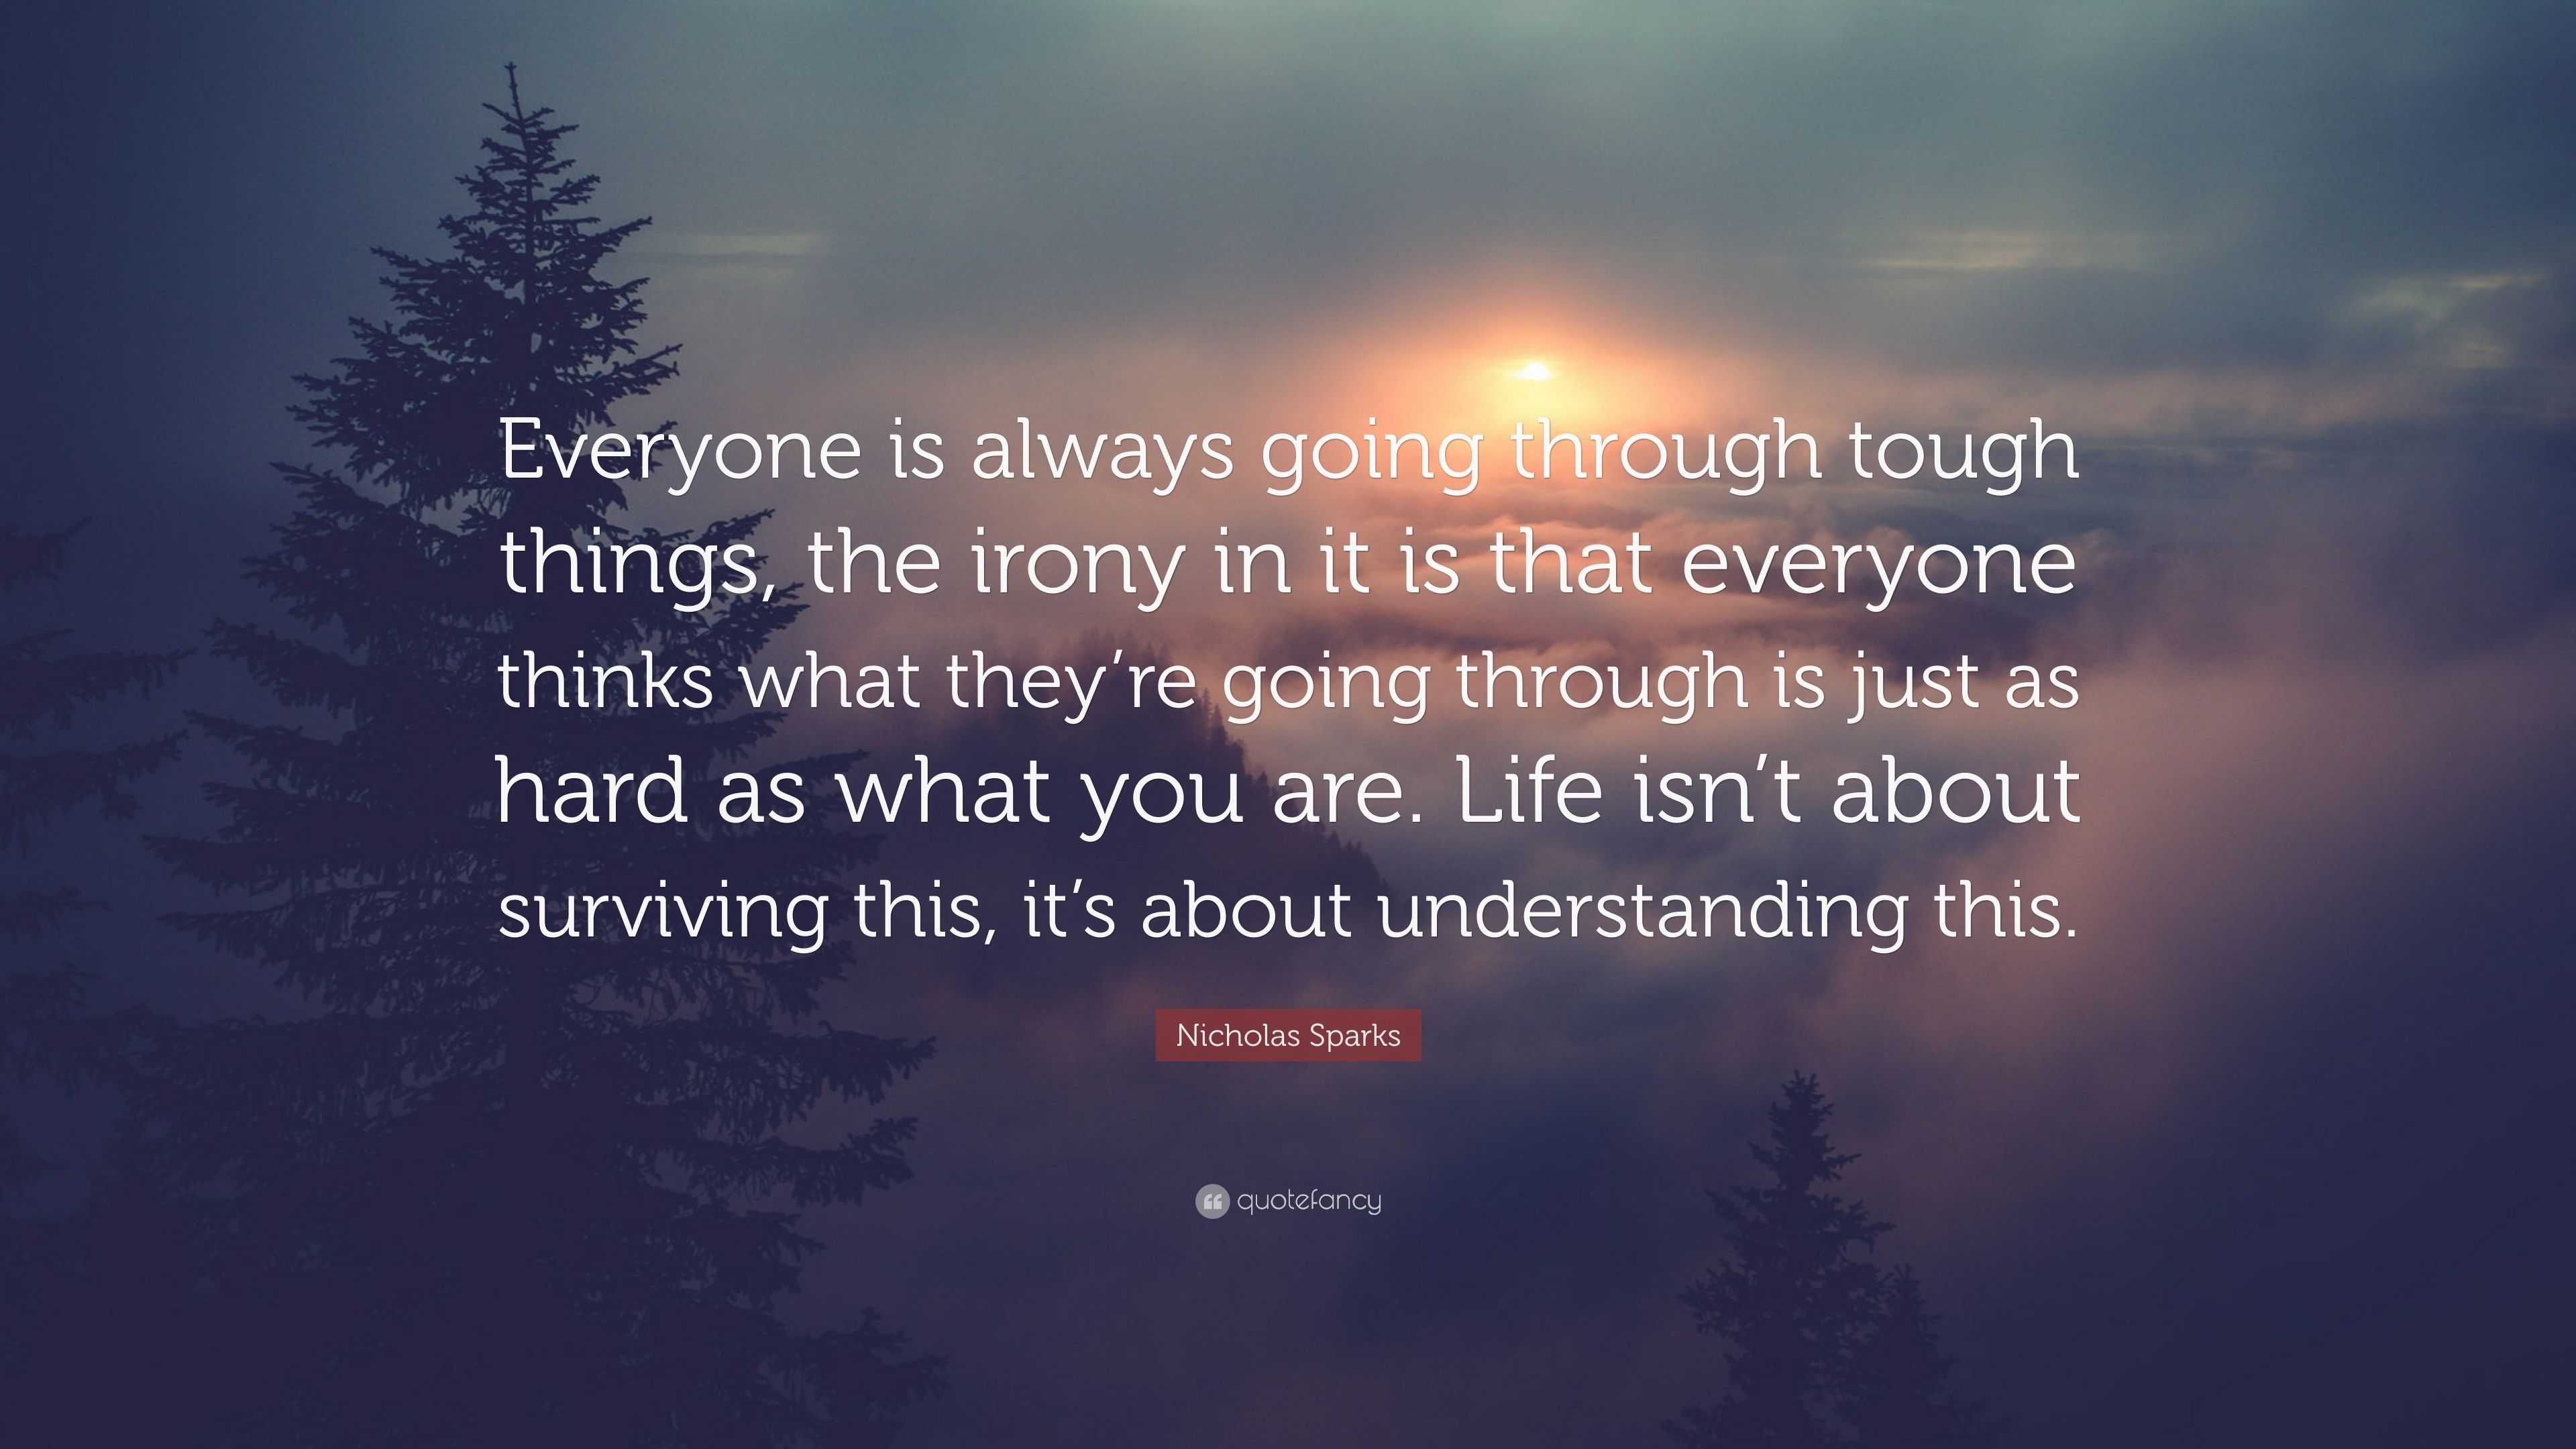 Nicholas Sparks Quote Everyone Is Always Going Through Tough Things The Irony In It Is That Everyone Thinks What They Re Going Through Is Jus